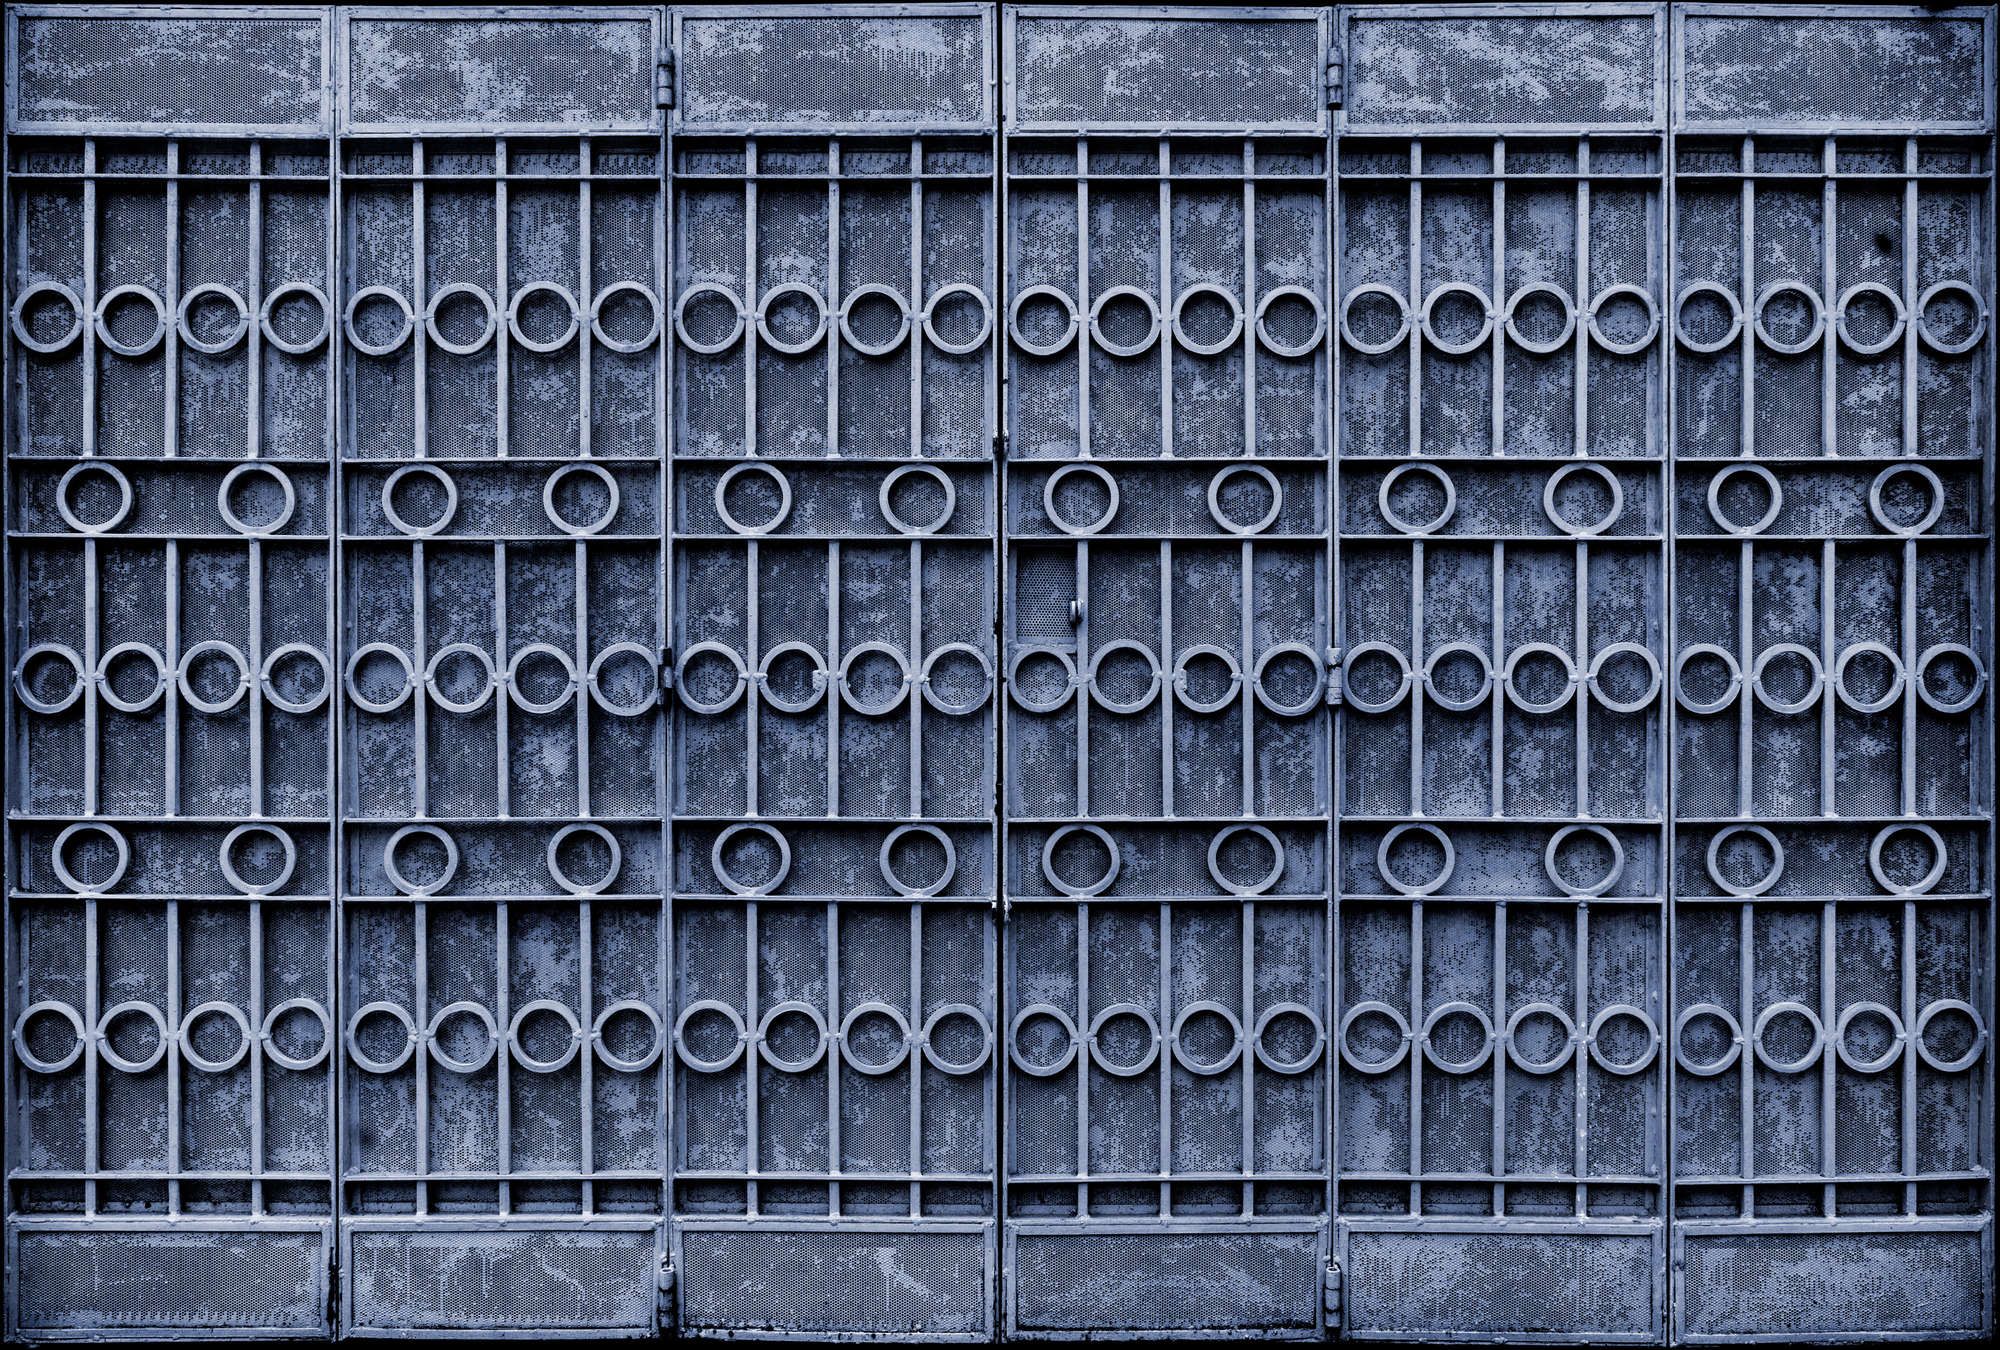             Photo wallpaper »jodhpur« - Close-up of a blue metal fence - Smooth, slightly shiny premium non-woven fabric
        